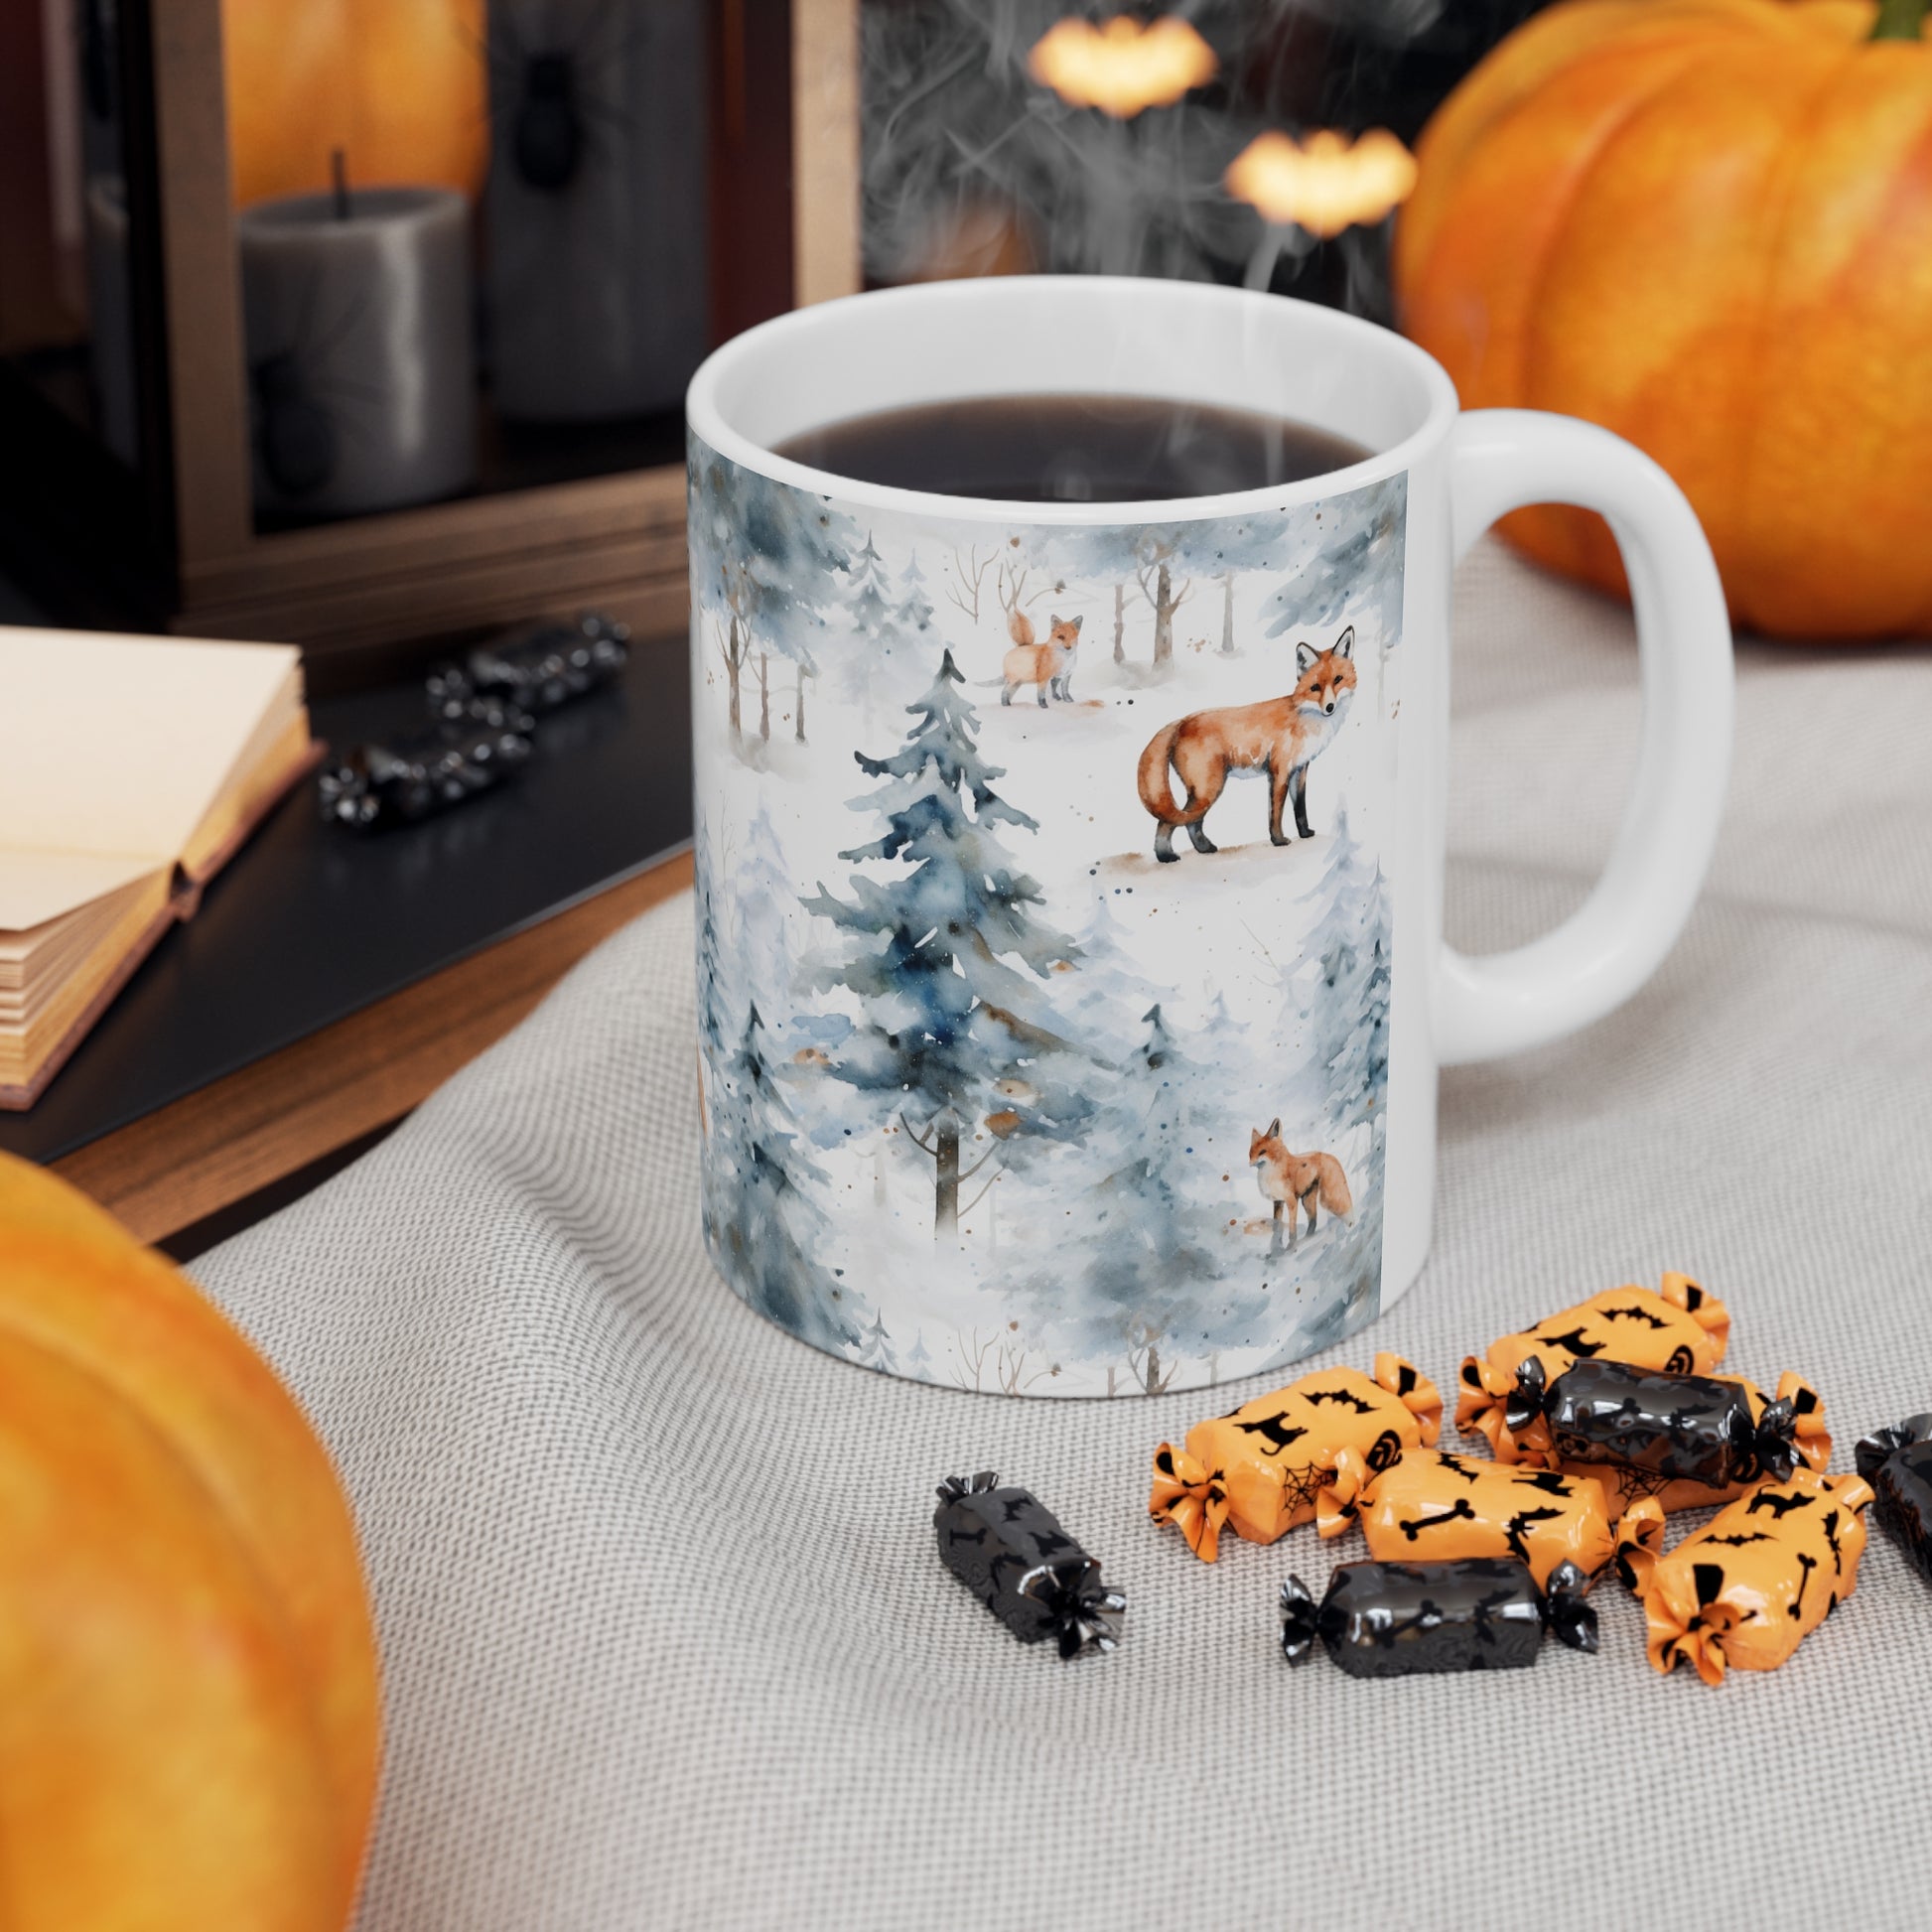 Ginger Fox Coffee Mug, Winter Landscape Forest Trees Woodlands Snow Cute Animal Art Ceramic Cup Tea Hot Chocolate Unique Novelty Cool Gift Starcove Fashion